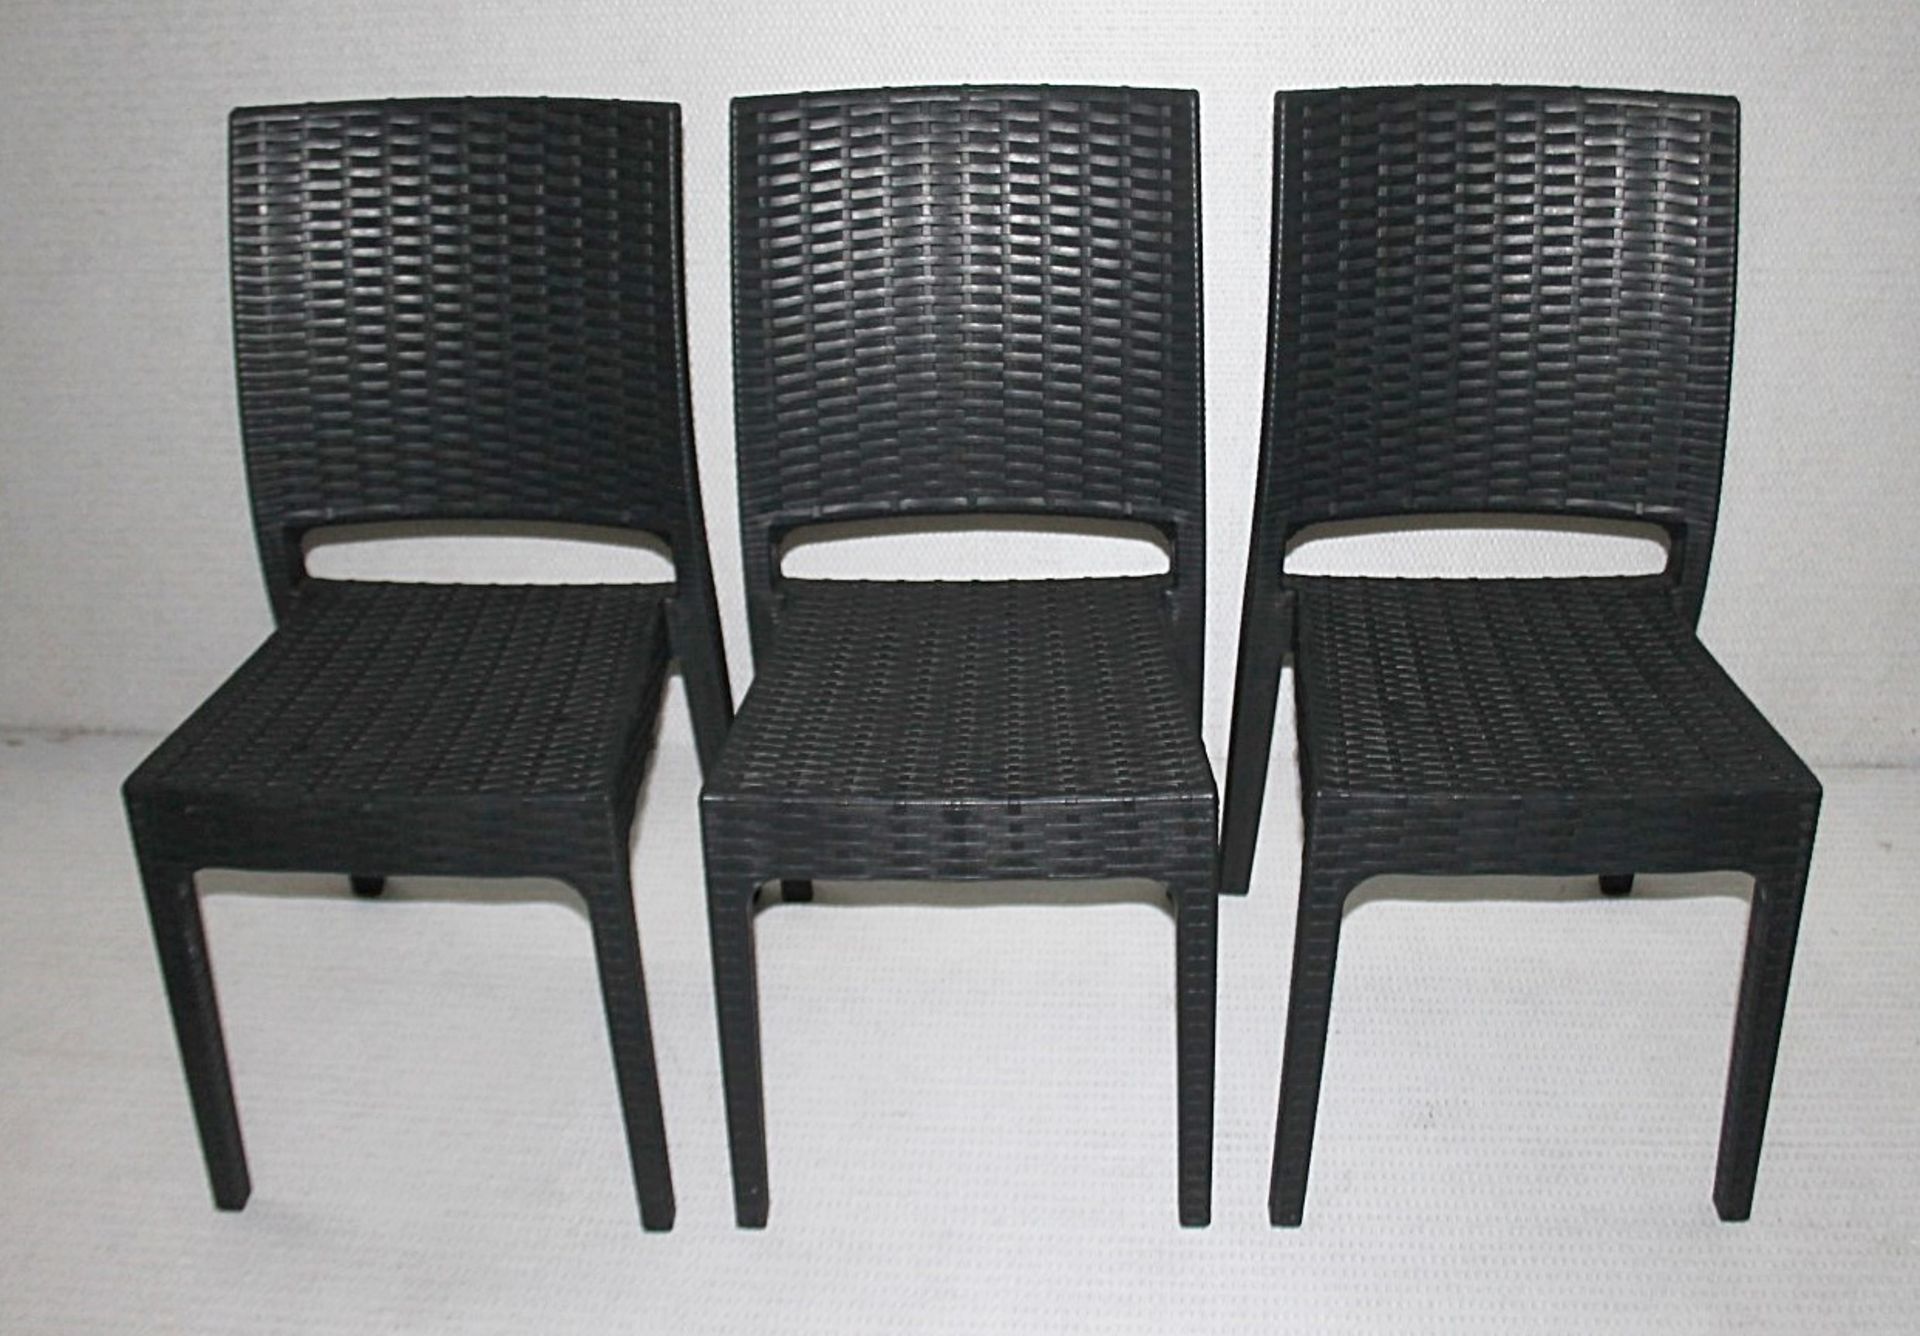 4 x Siesta 'Florida' Rattan Style Garden Chairs In Dark Grey - Suitable For Commercial or Home Use - - Image 6 of 14